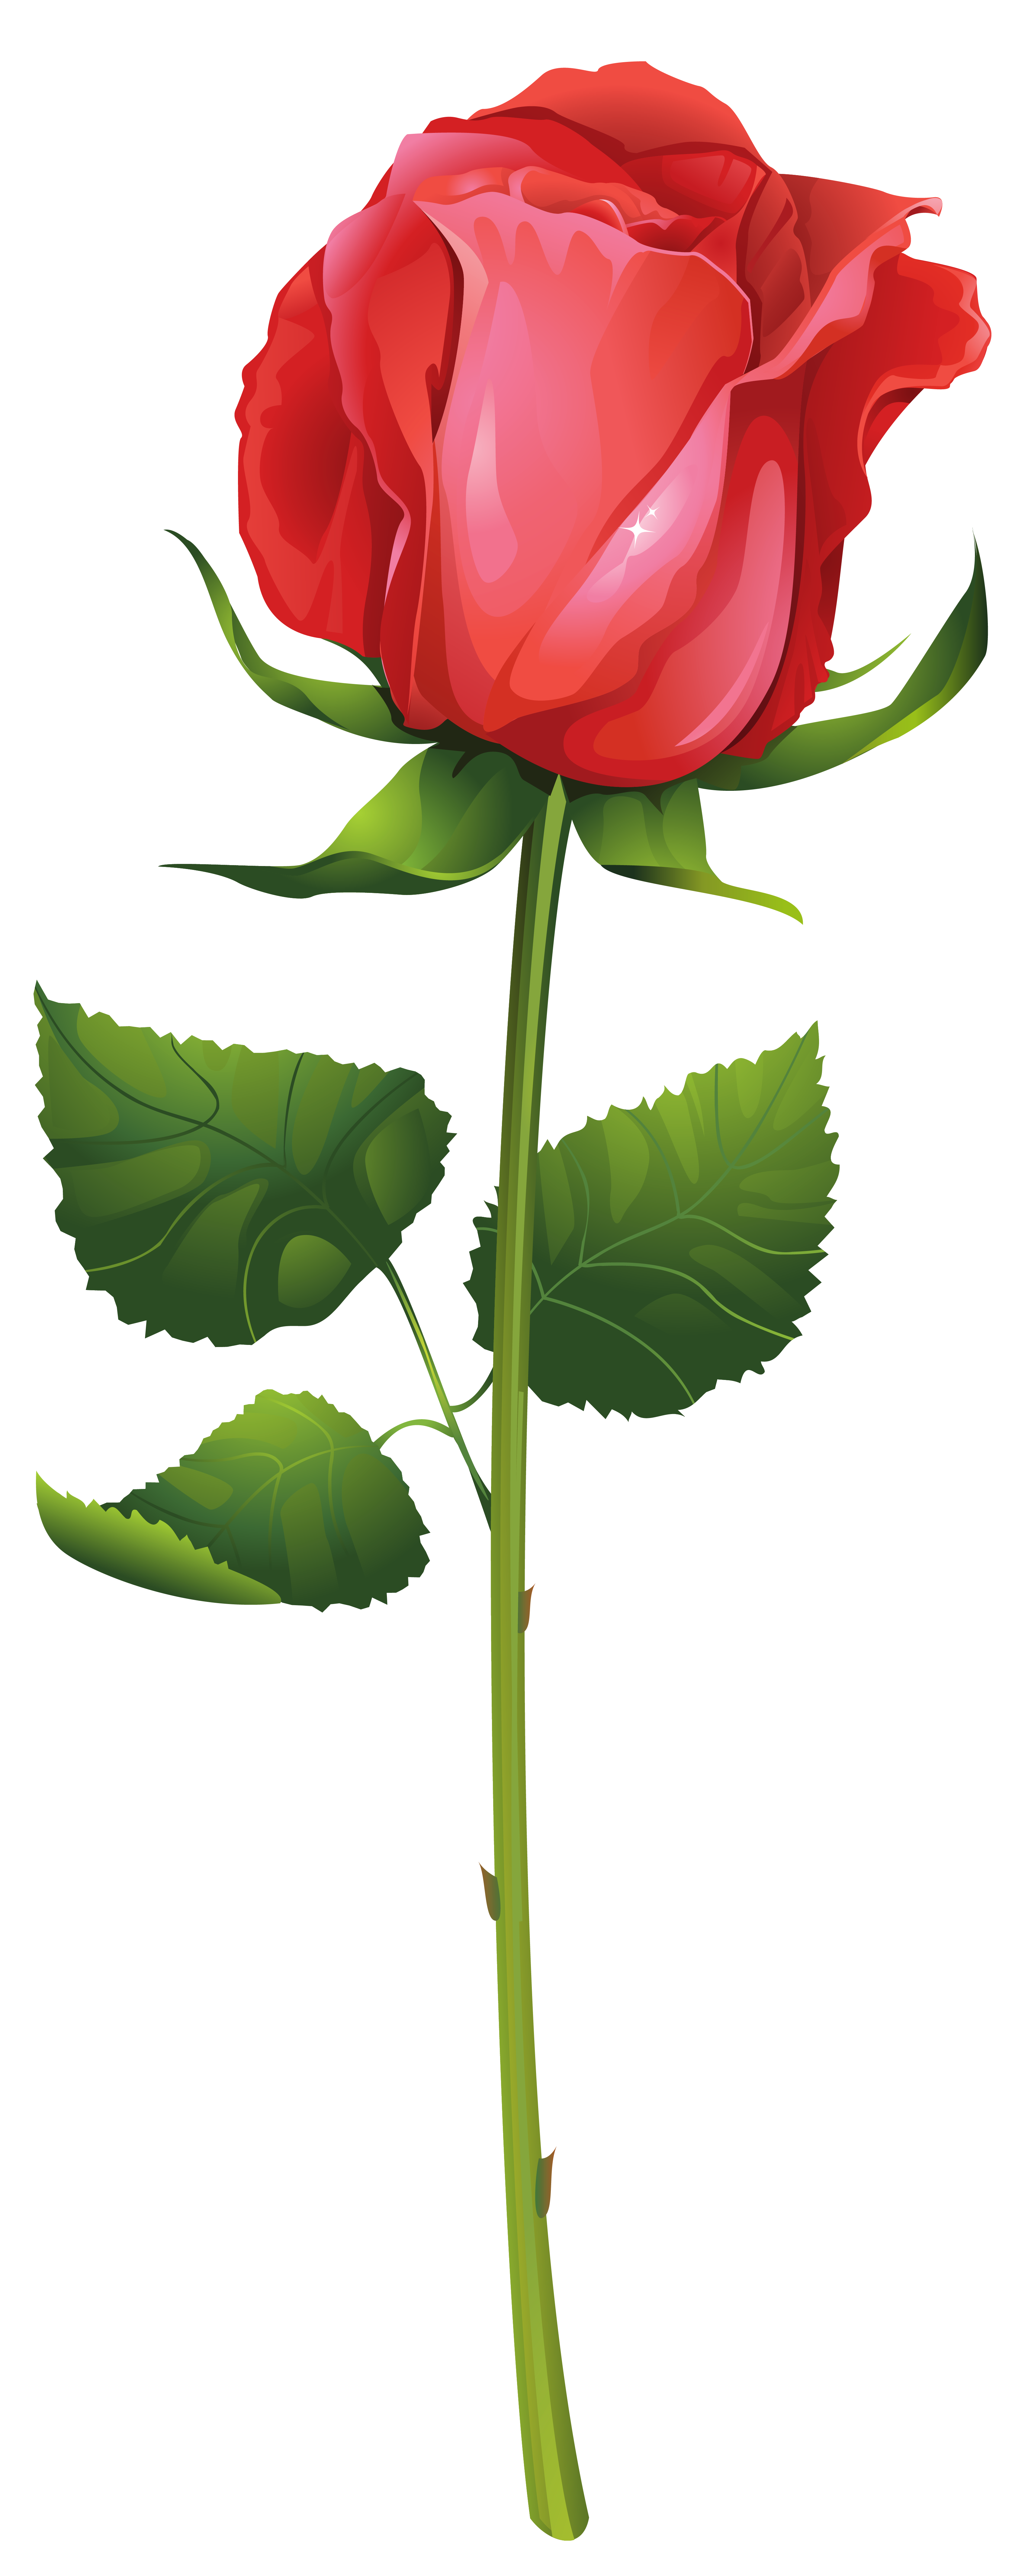 Rose with Stem PNG Clip Art Image | Gallery Yopriceville - High-Quality